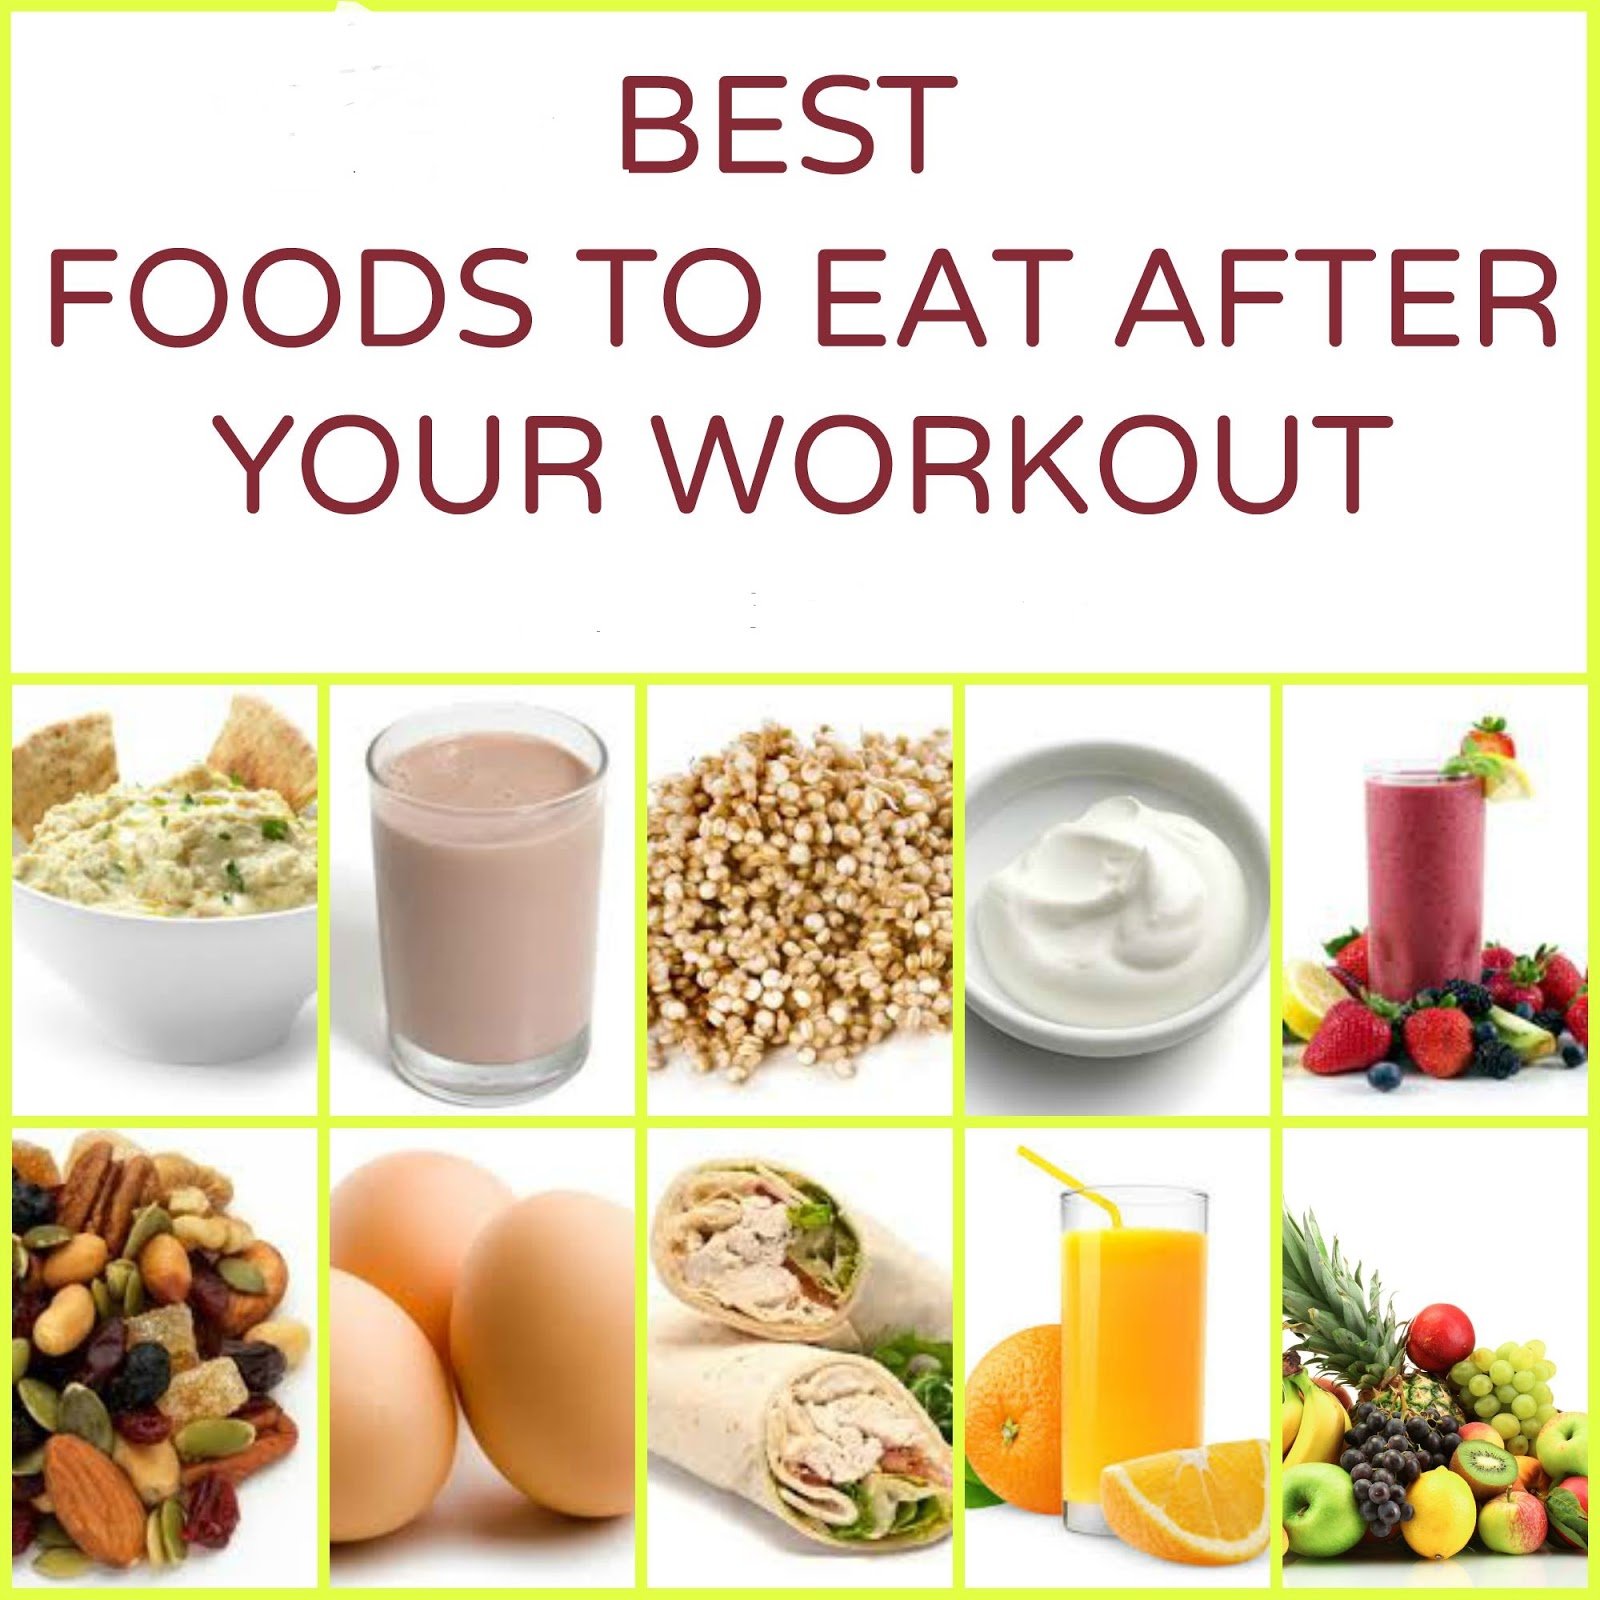 What food to eat after a workout to build muscle